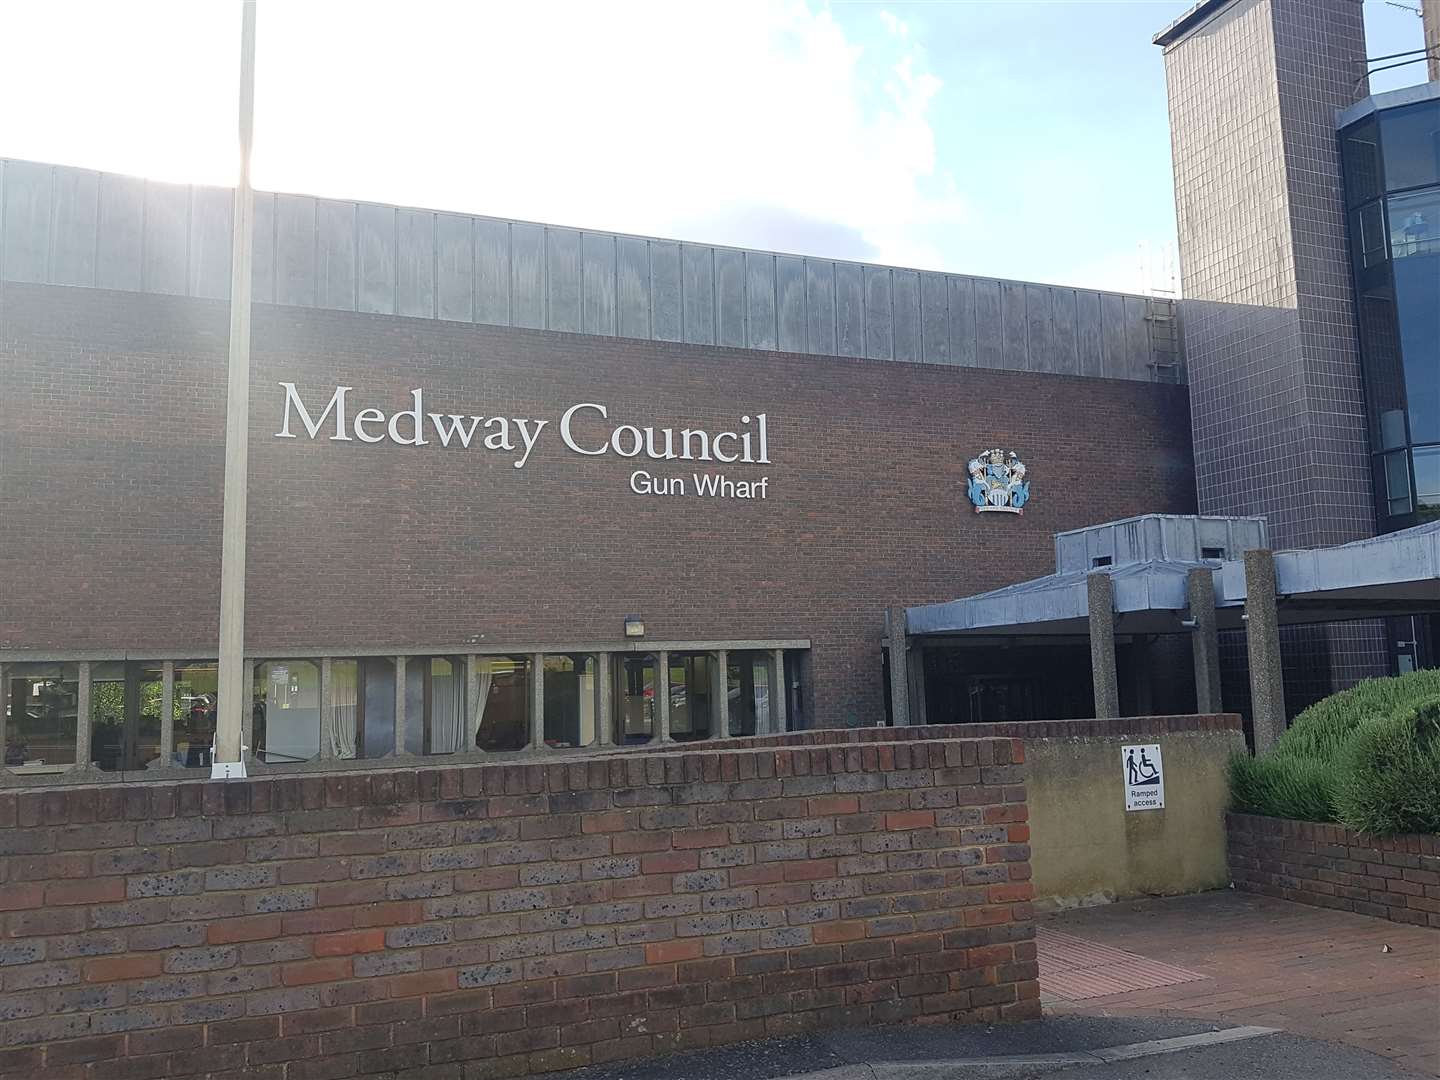 The County and Family Court is due to move to Gun Wharf, the home of Medway Council